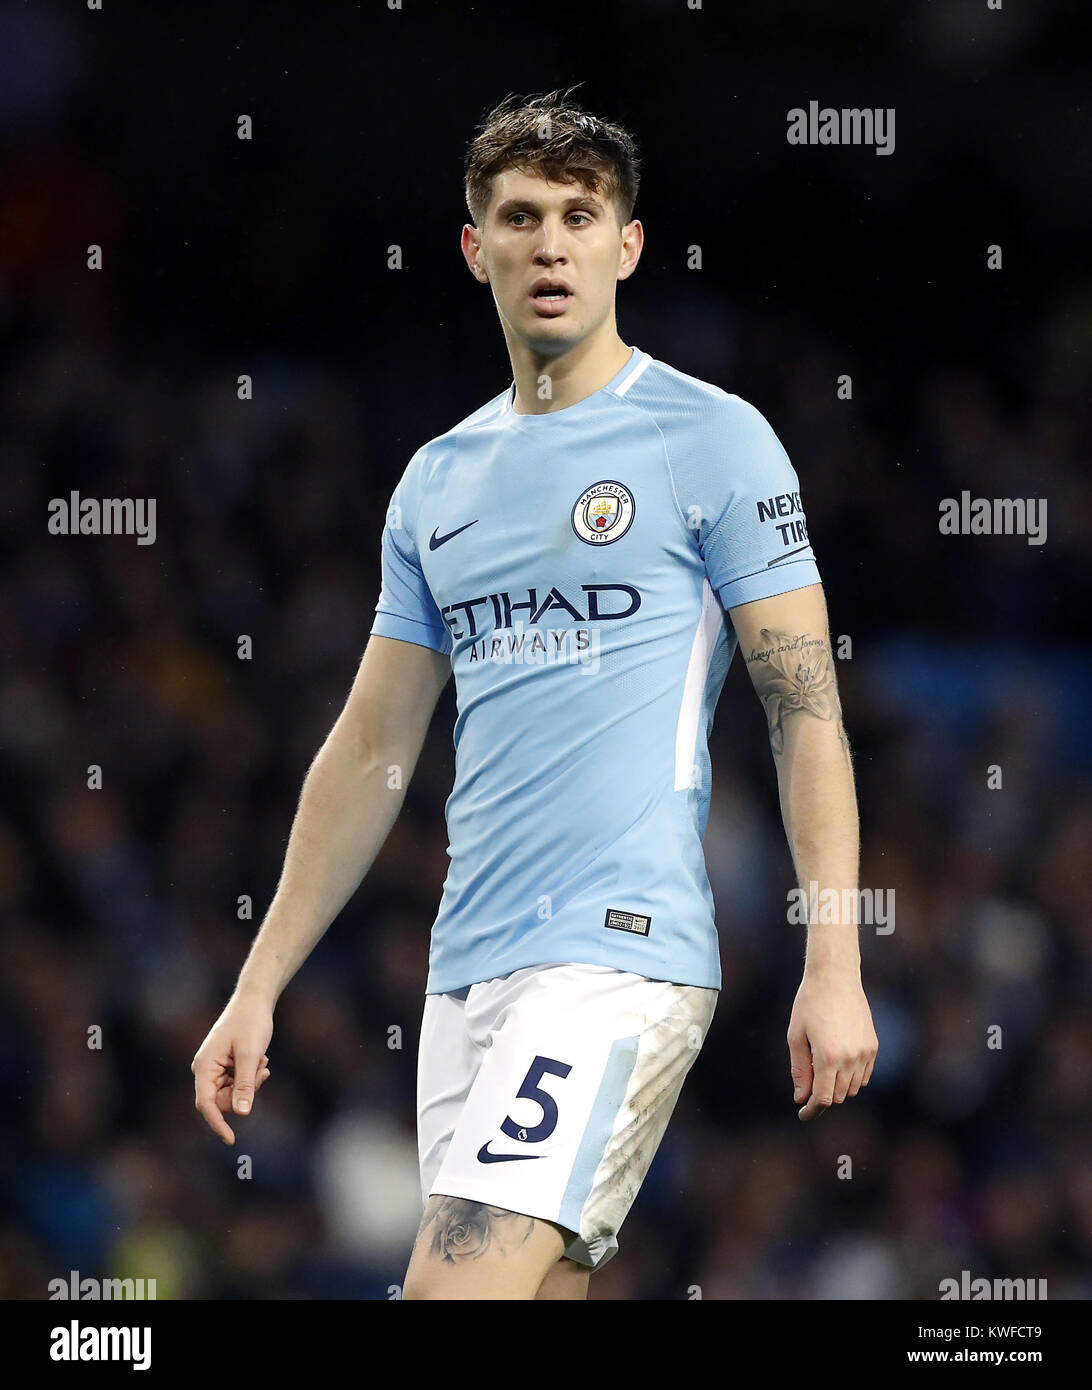 Manchester City's John Stones during the Premier League match at the Etihad Stadium, Manchester. PRESS ASSOCIATION Photo. Picture date: Tuesday January 2, 2018. See PA story SOCCER Man City. Photo credit should read: Martin Rickett/PA Wire. RESTRICTIONS: No use with unauthorised audio, video, data, fixture lists, club/league logos or 'live' services. Online in-match use limited to 75 images, no video emulation. No use in betting, games or single club/league/player publications. Stock Photo